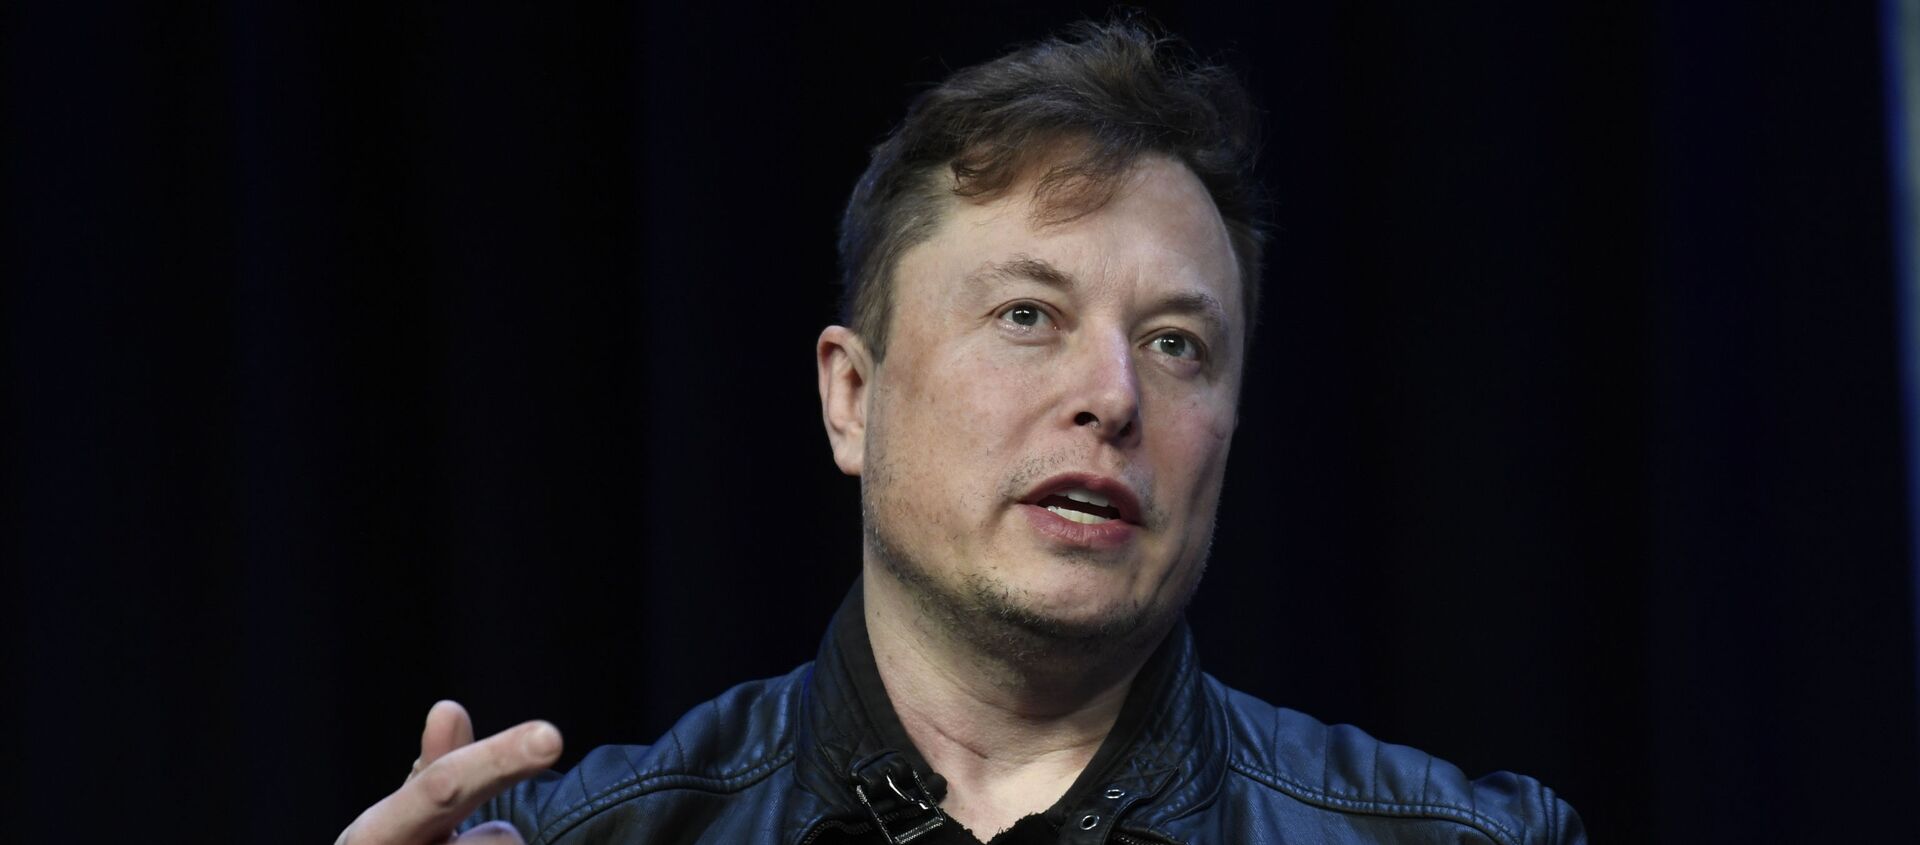 Tesla and SpaceX chief executive officer Elon Musk speaks at the SATELLITE Conference and Exhibition in Washington, Monday, 9 March 2020. - Sputnik International, 1920, 12.02.2021